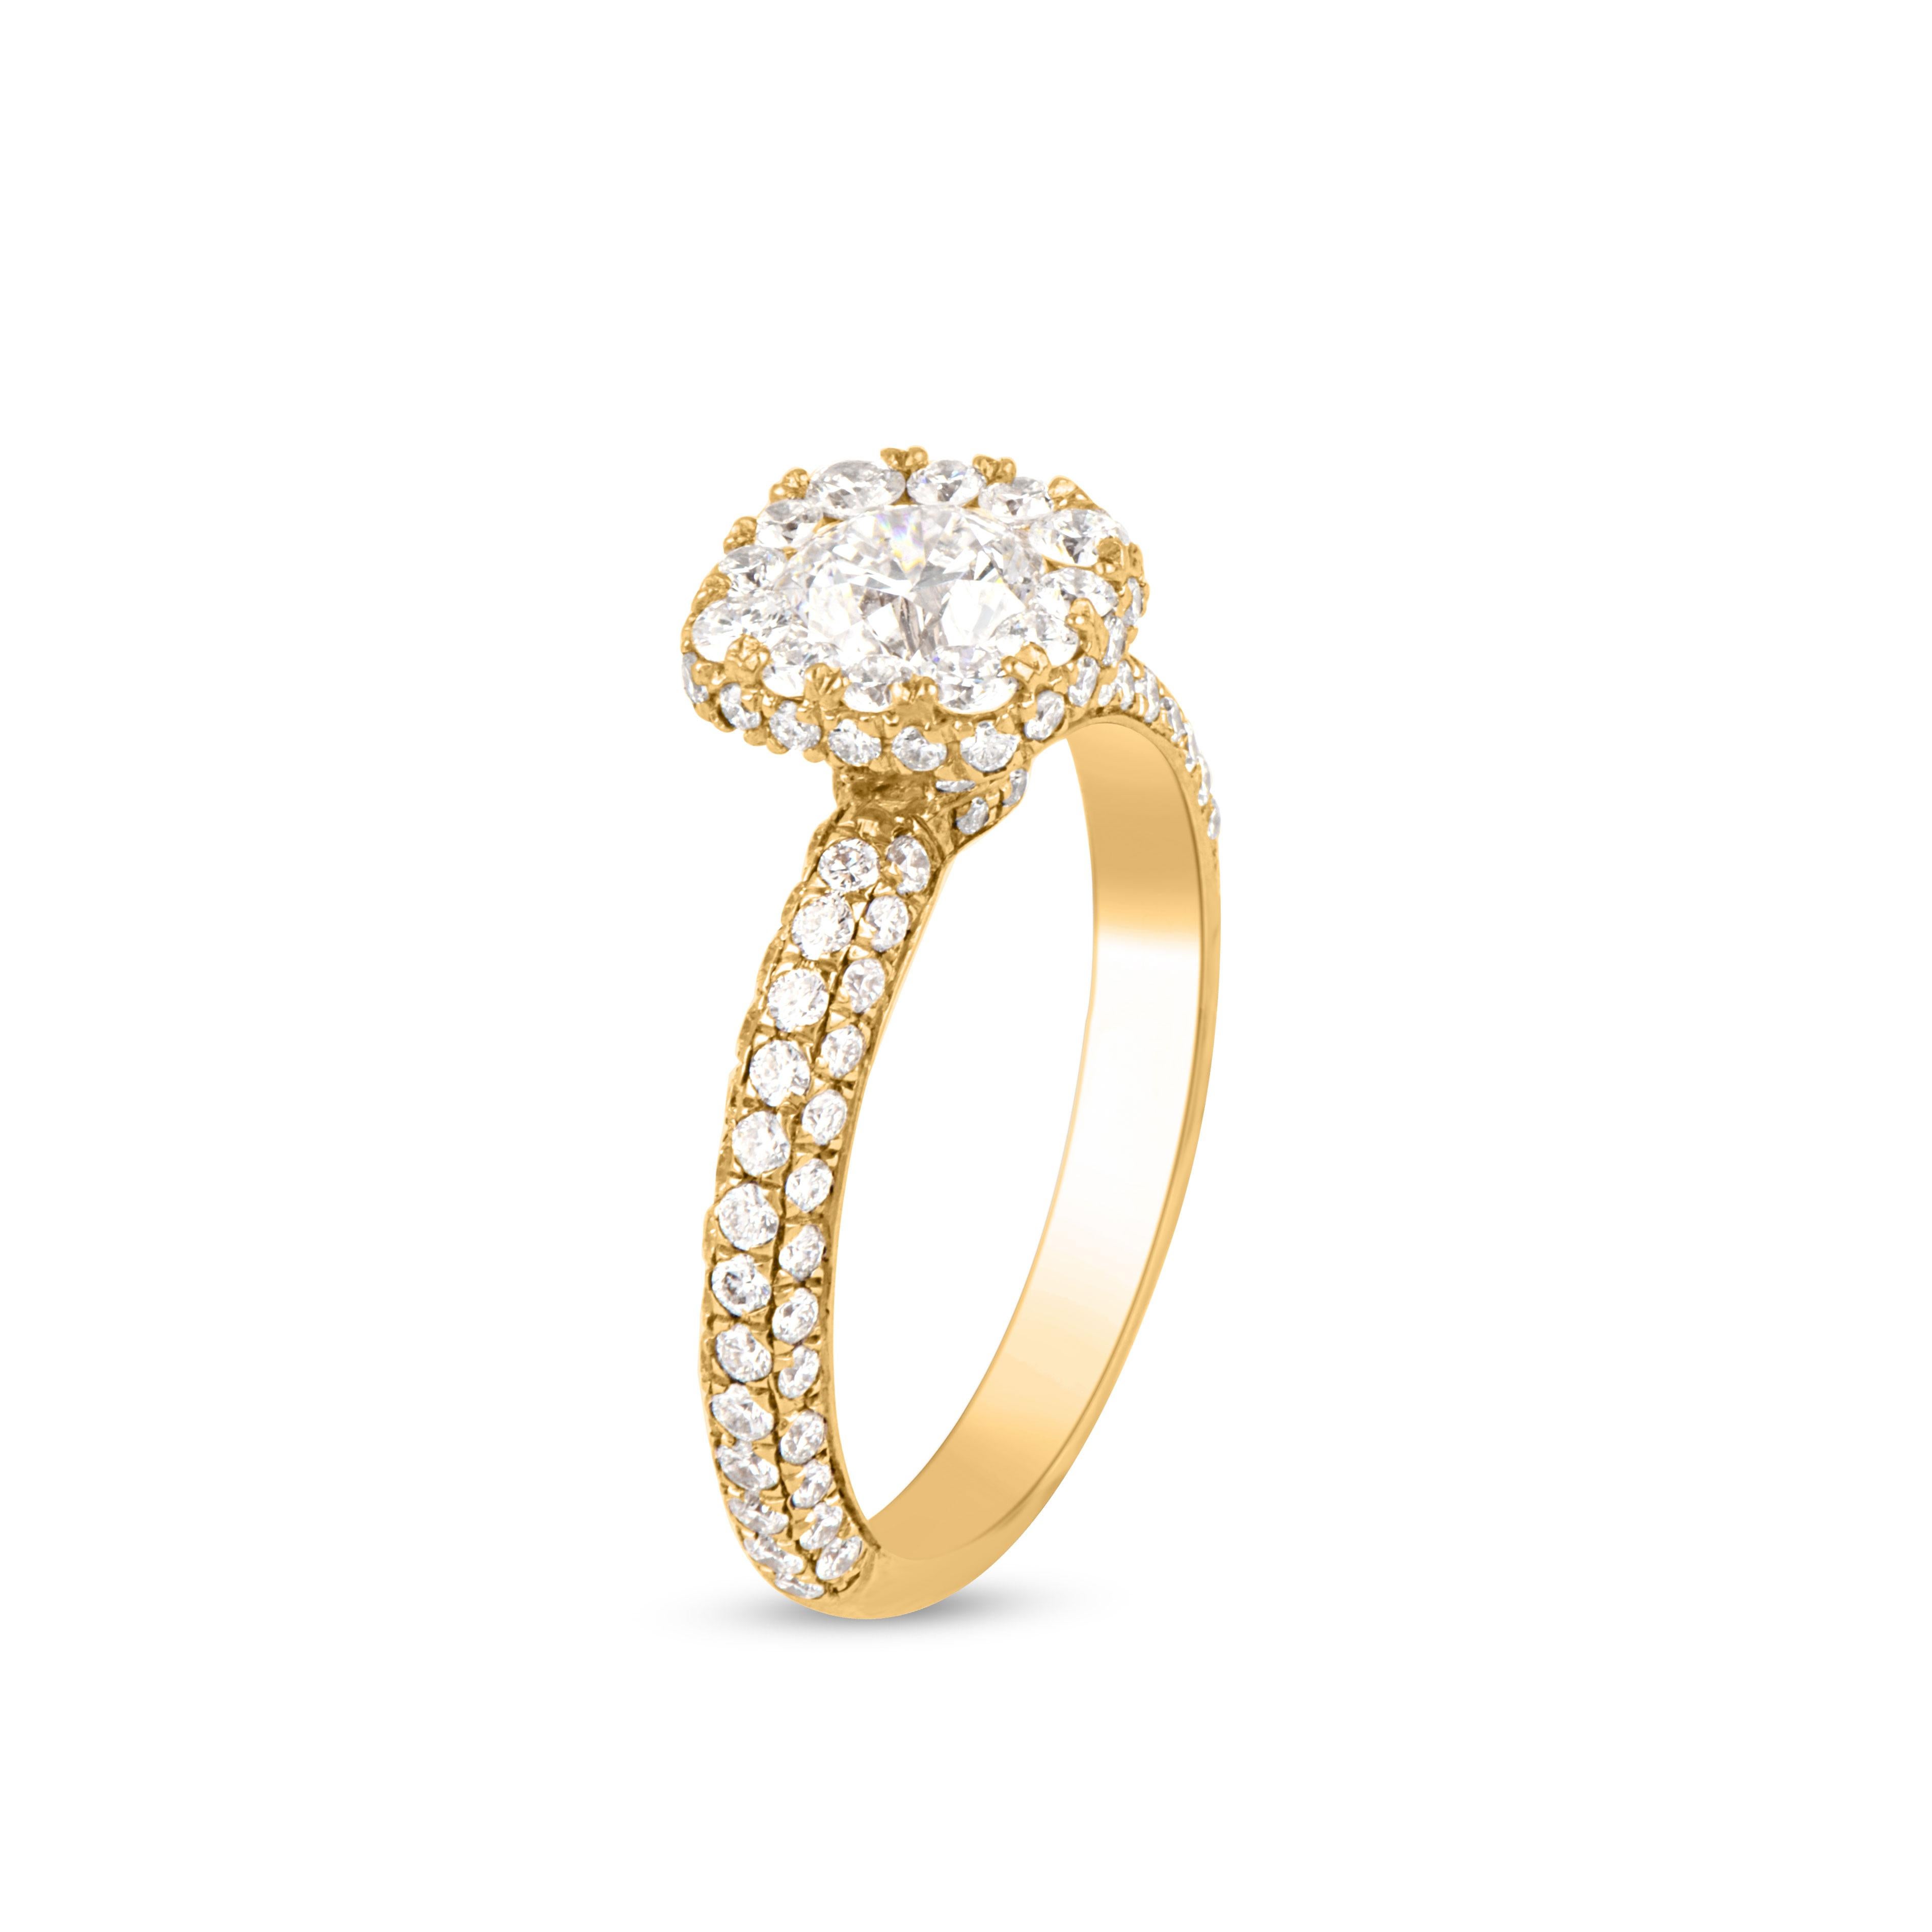 Stunning and classic, this diamond ring is beautifully crafted in 18K Yellow gold. The engagement ring feature 0.50 ct centre stone and 0.50 ct diamond frame and lined with rows of sparkling 98 round white diamonds in secured pressure and